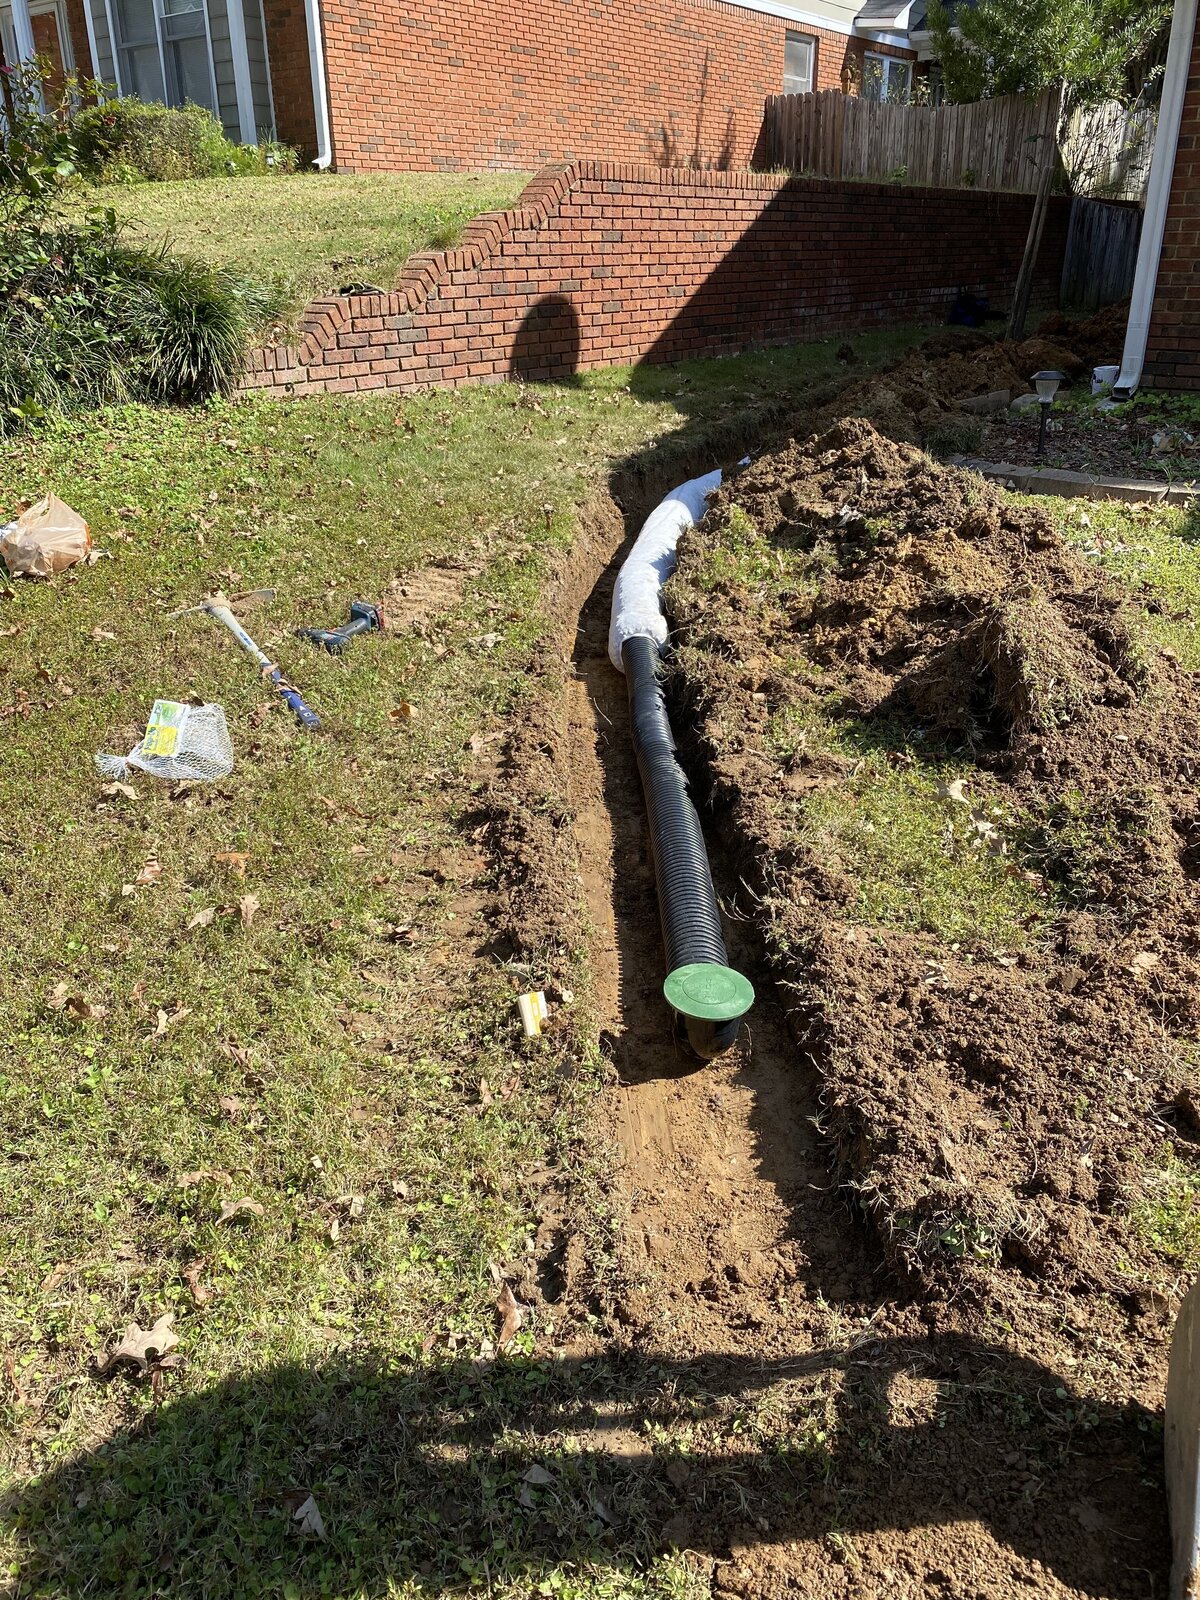 pipe-in-dirt-trench-in-front-yard-next-to-brick-wall